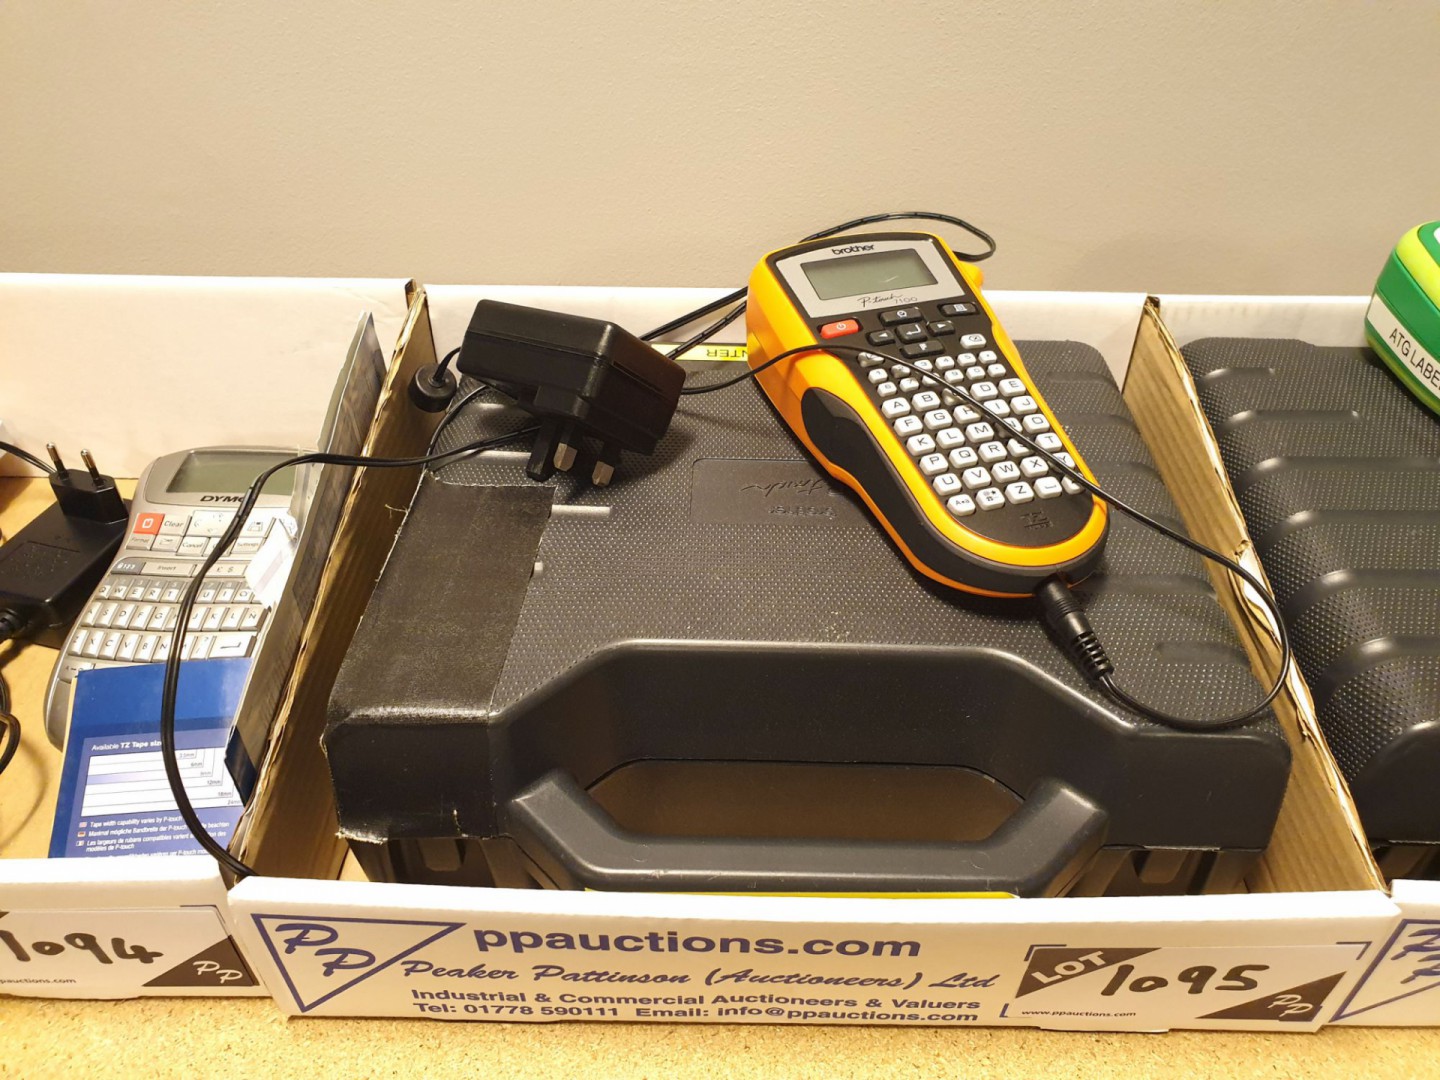 Brother P-Touch 7100 label printer in carry case